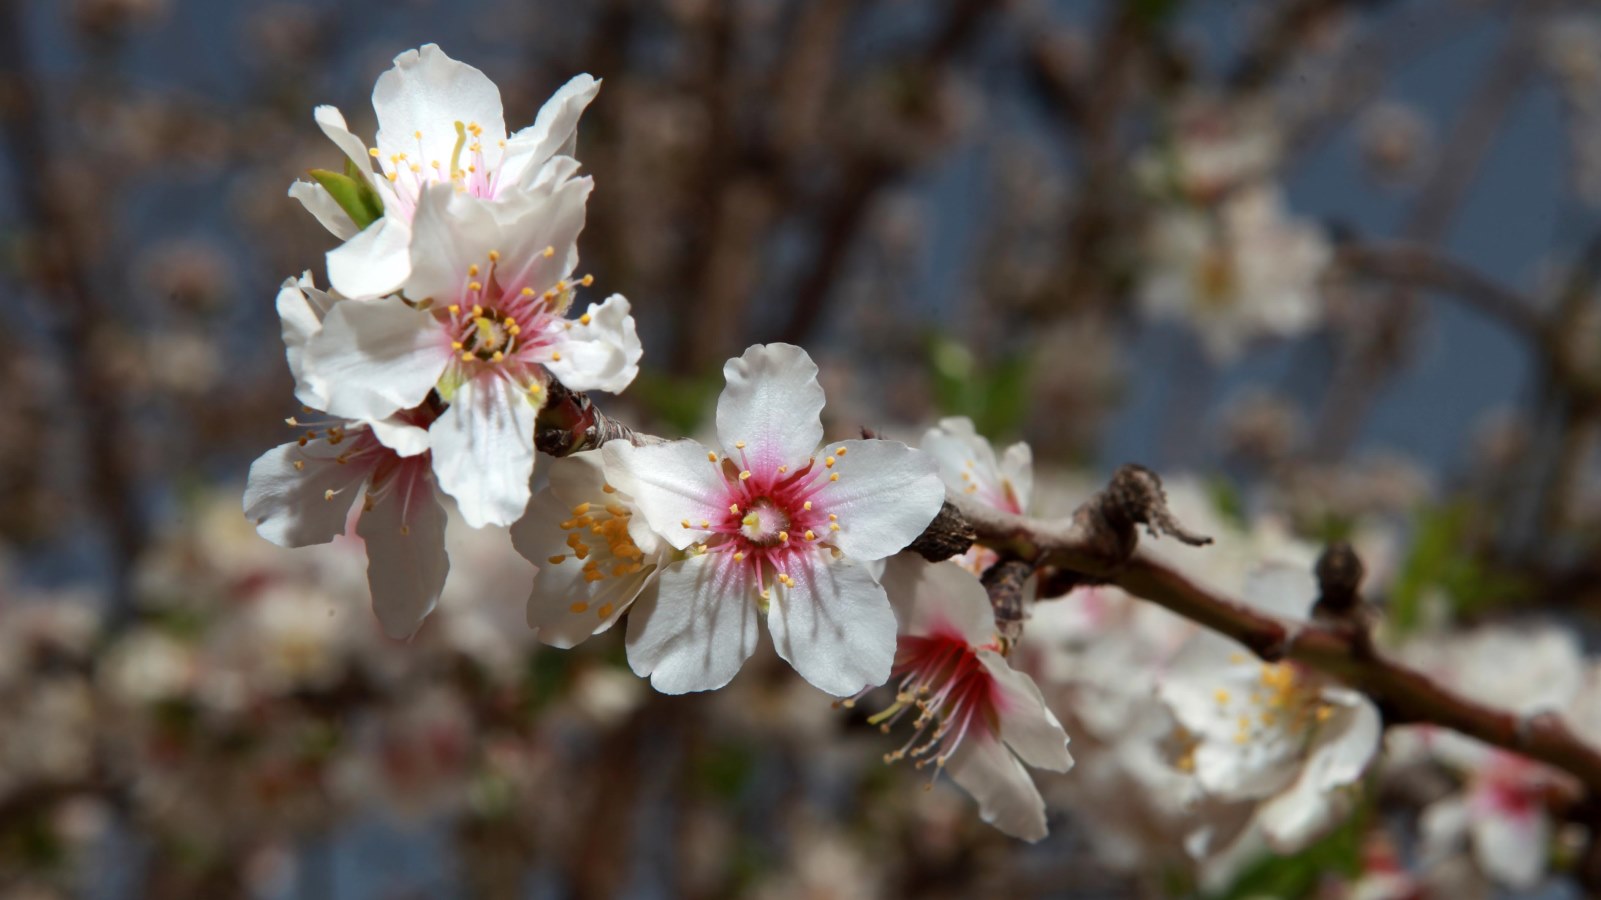 An almond tree blossoming in the Judean Hills. Photo by Yossi Zamir/FLASH90